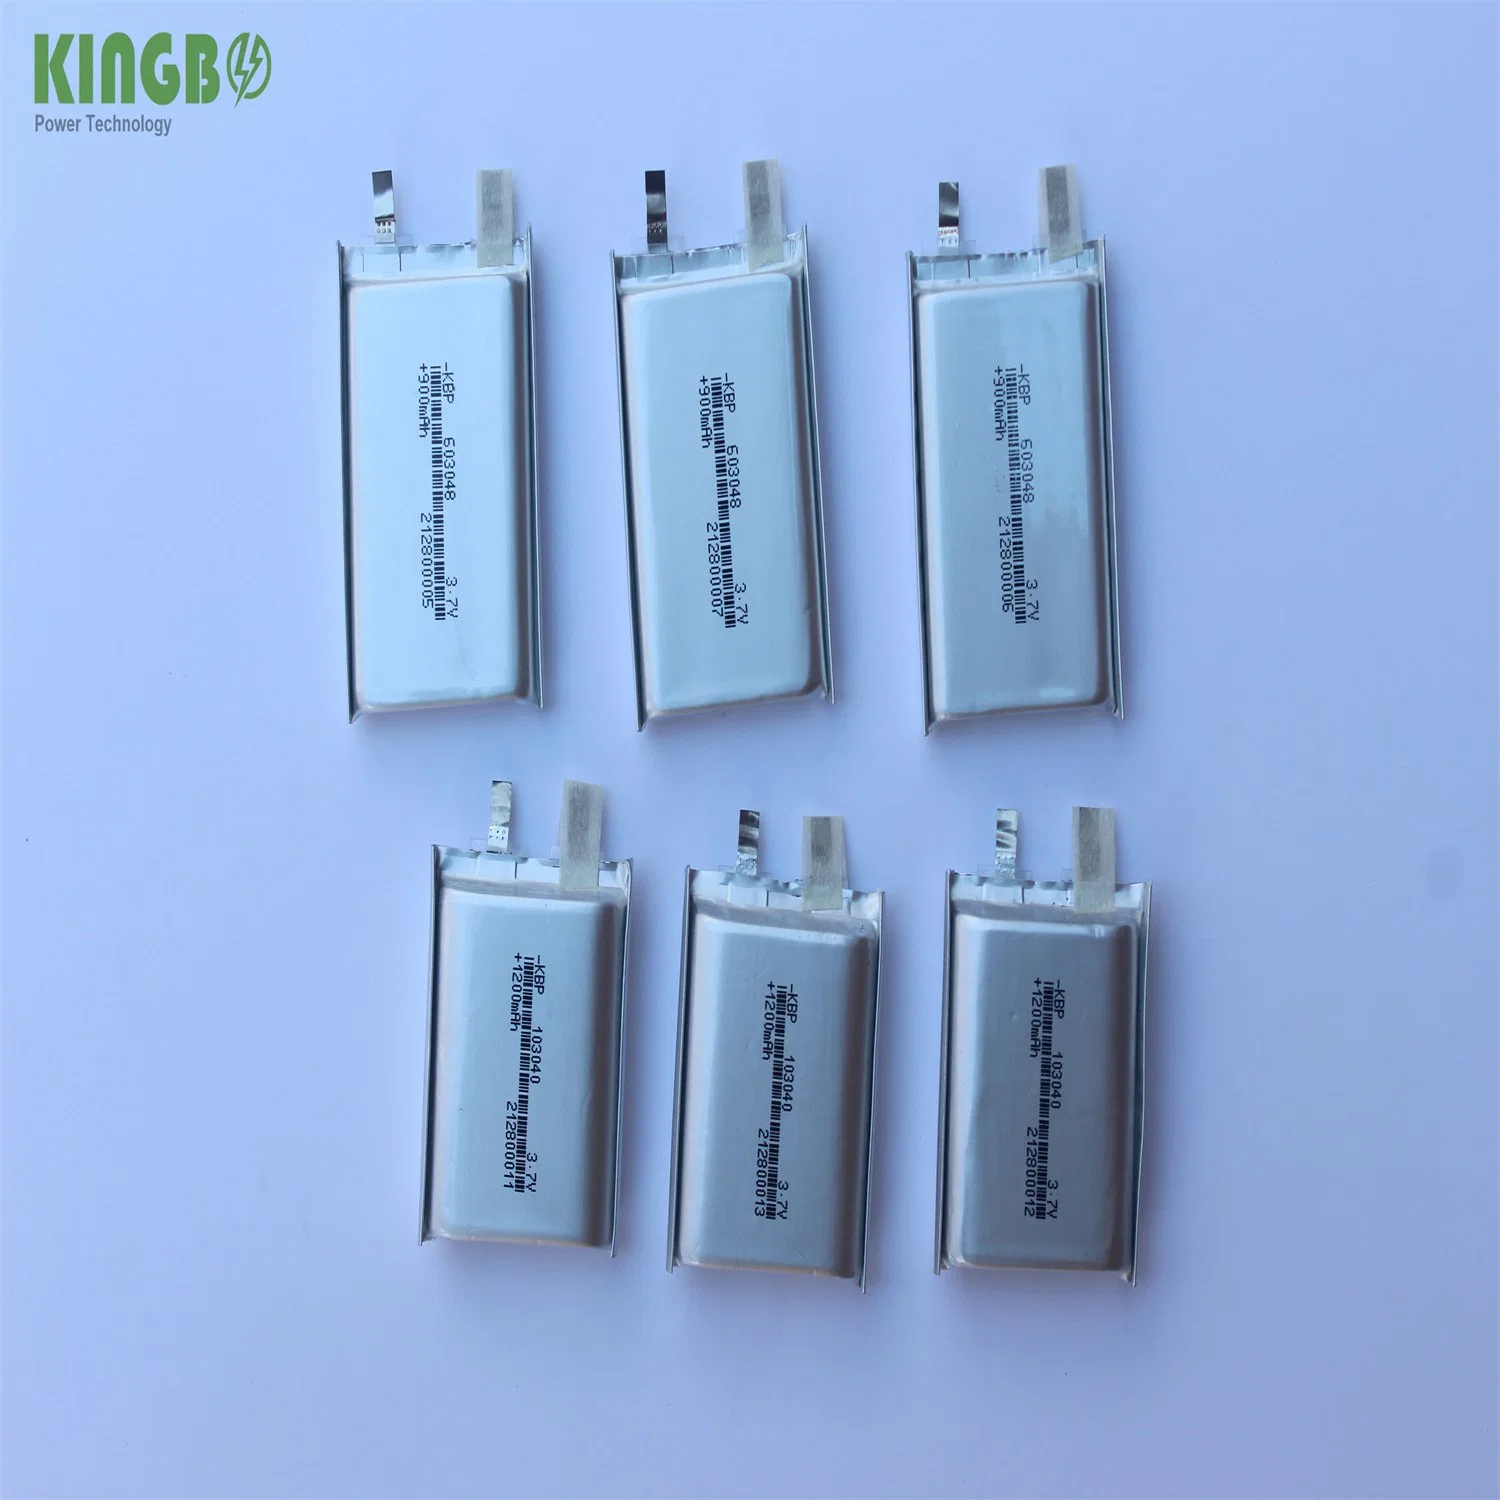 3.7V Rechargeable Lithium Ion Battery Pack Smartphone Battery (1500mAh)